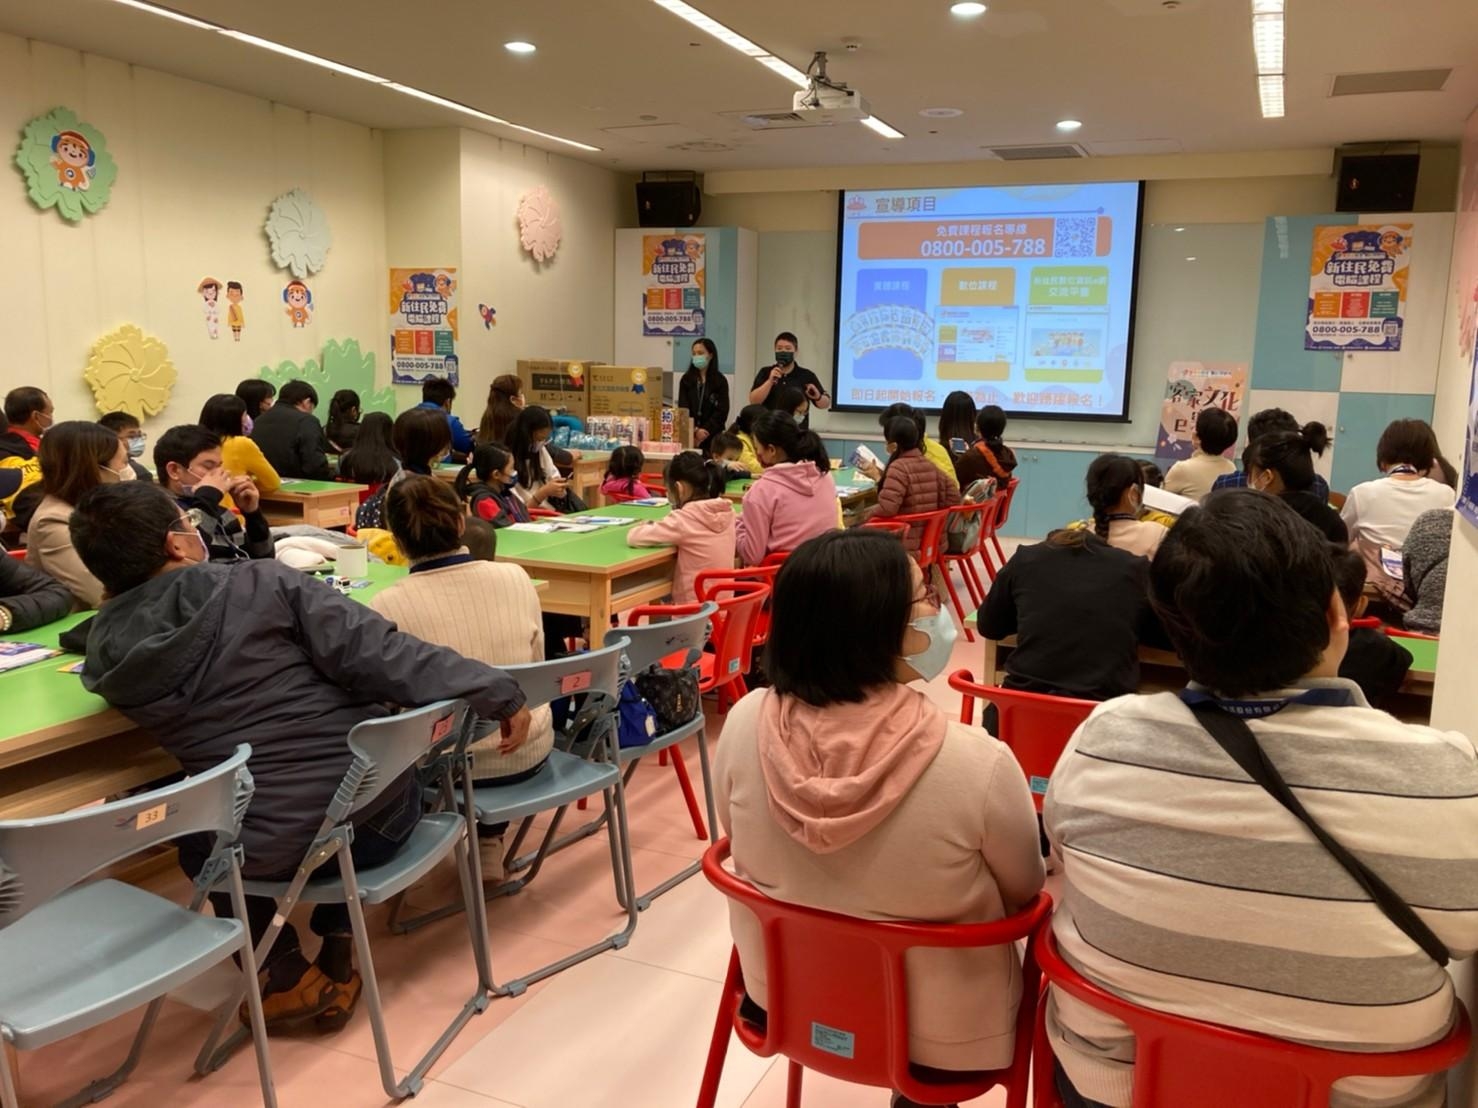 A platform "New Immigrants in Taiwan" provides online learning courses. (Photo / Provided by the NIA)